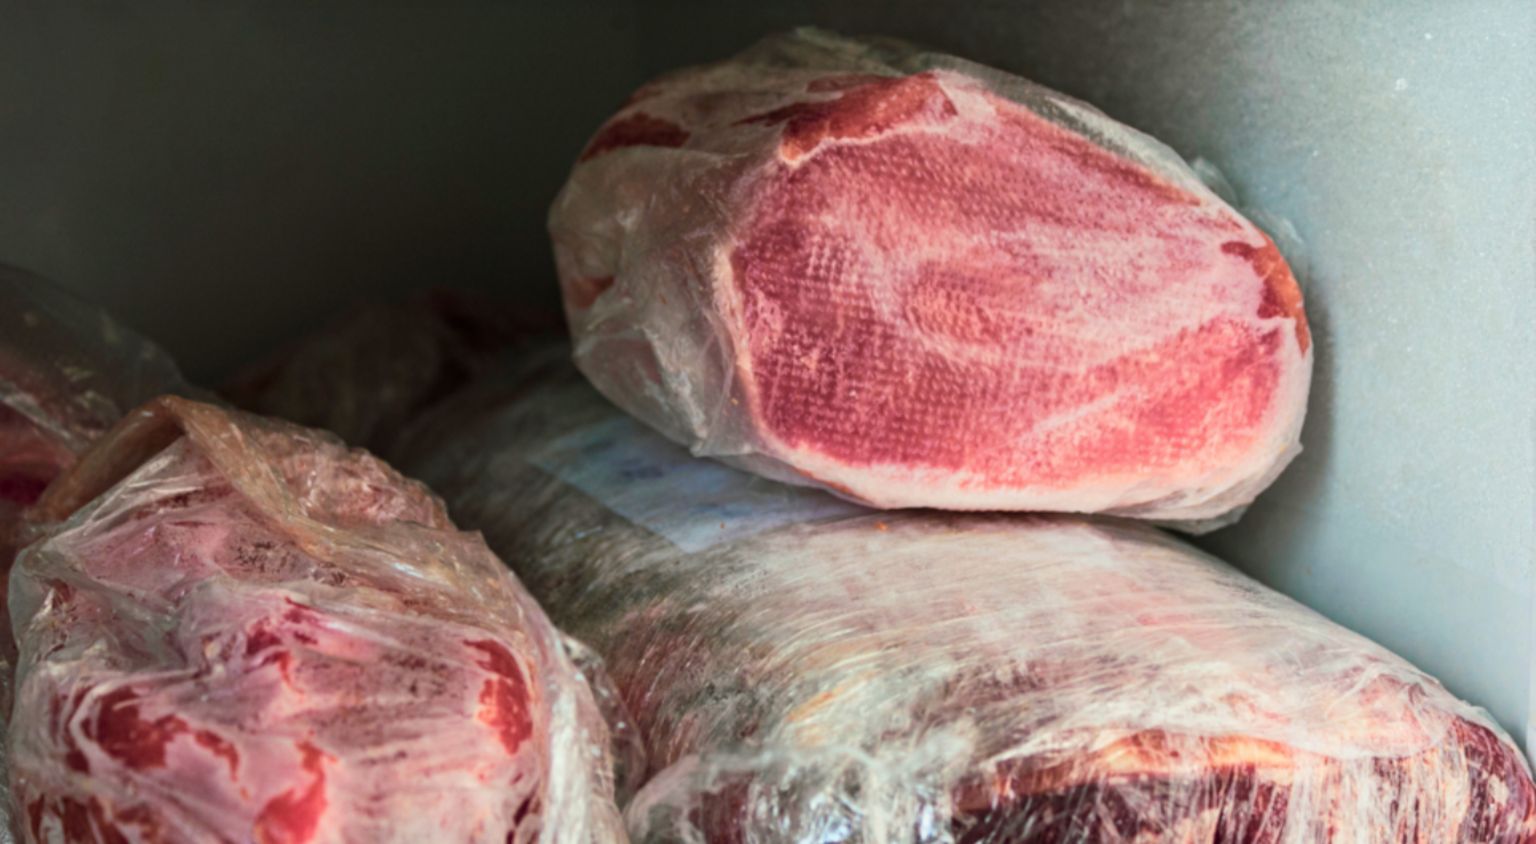 An image of red meat being stored safely